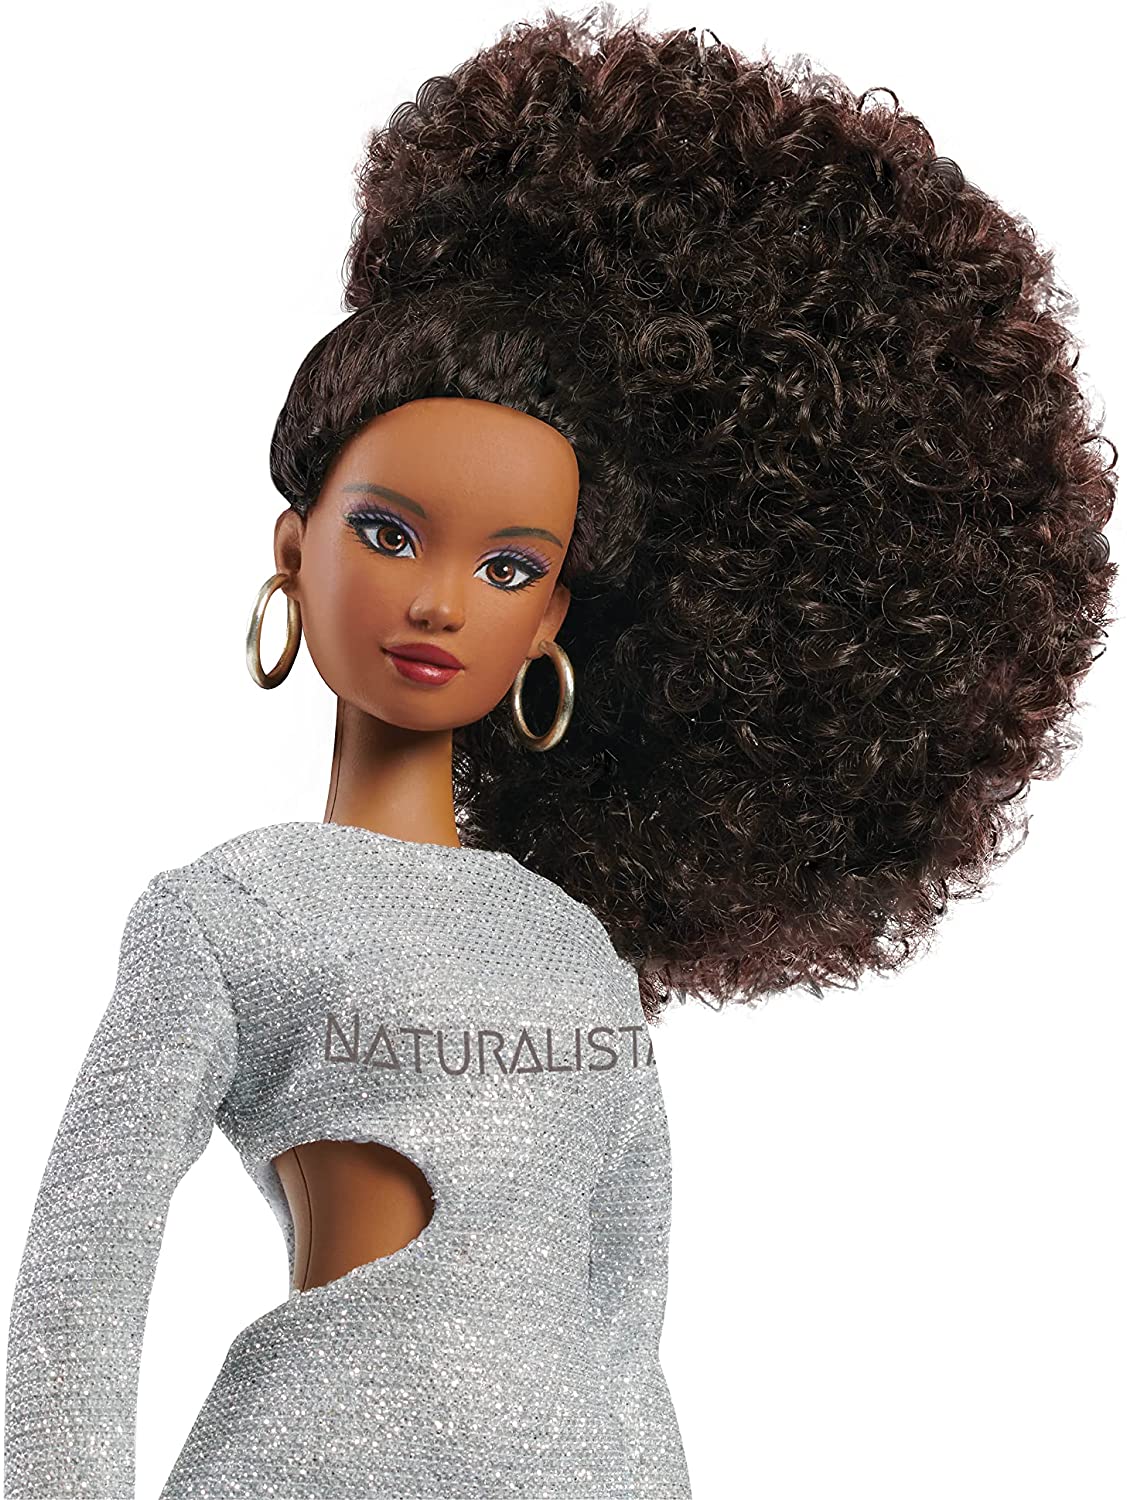 Naturalistas fashion dolls from Just Play and Purpose Toys 